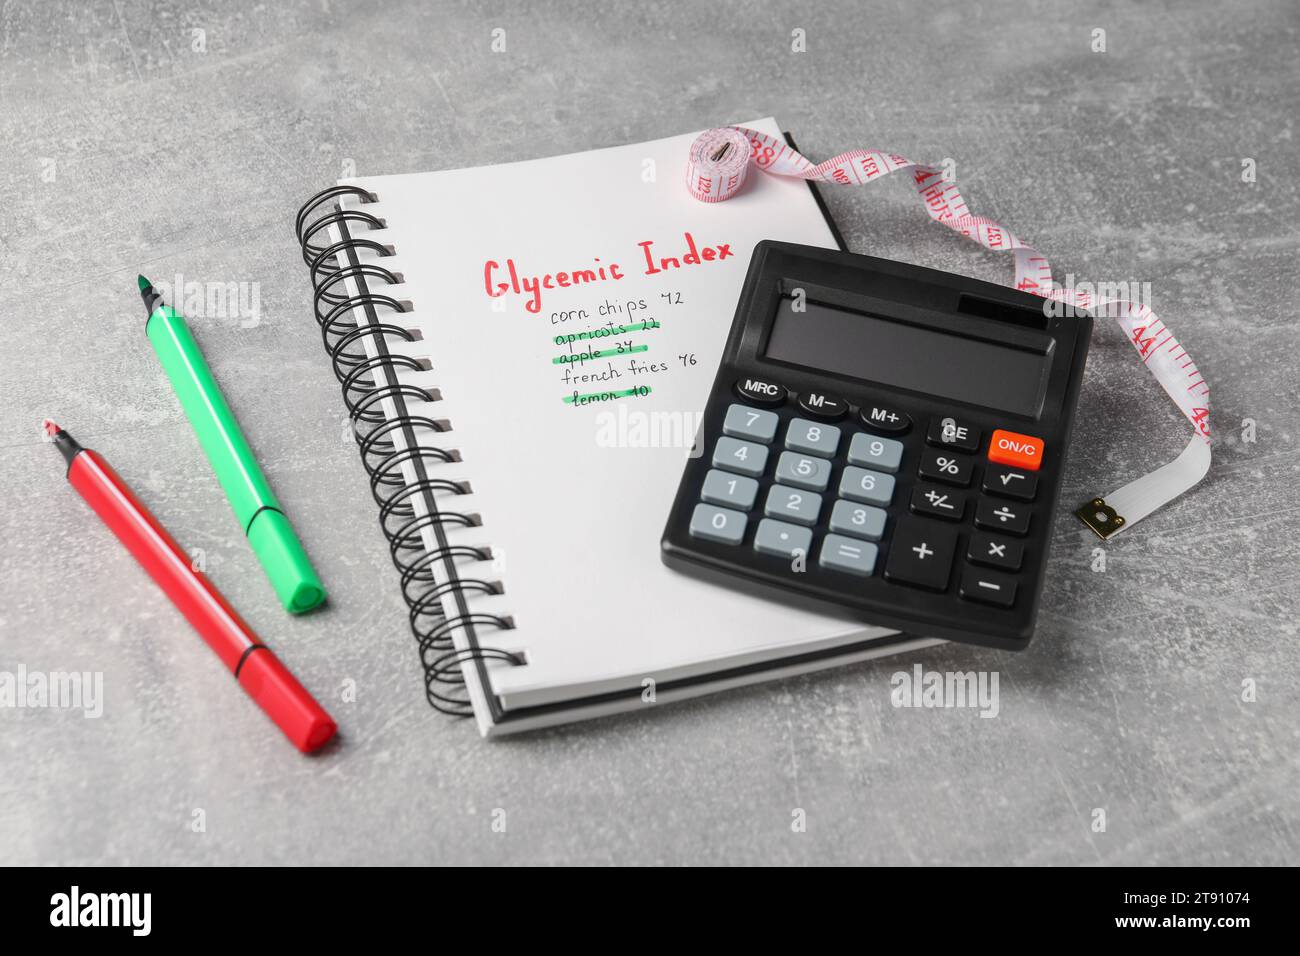 Glycemic Index. Notebook with information, markers, calculator and measuring tape on light grey table Stock Photo